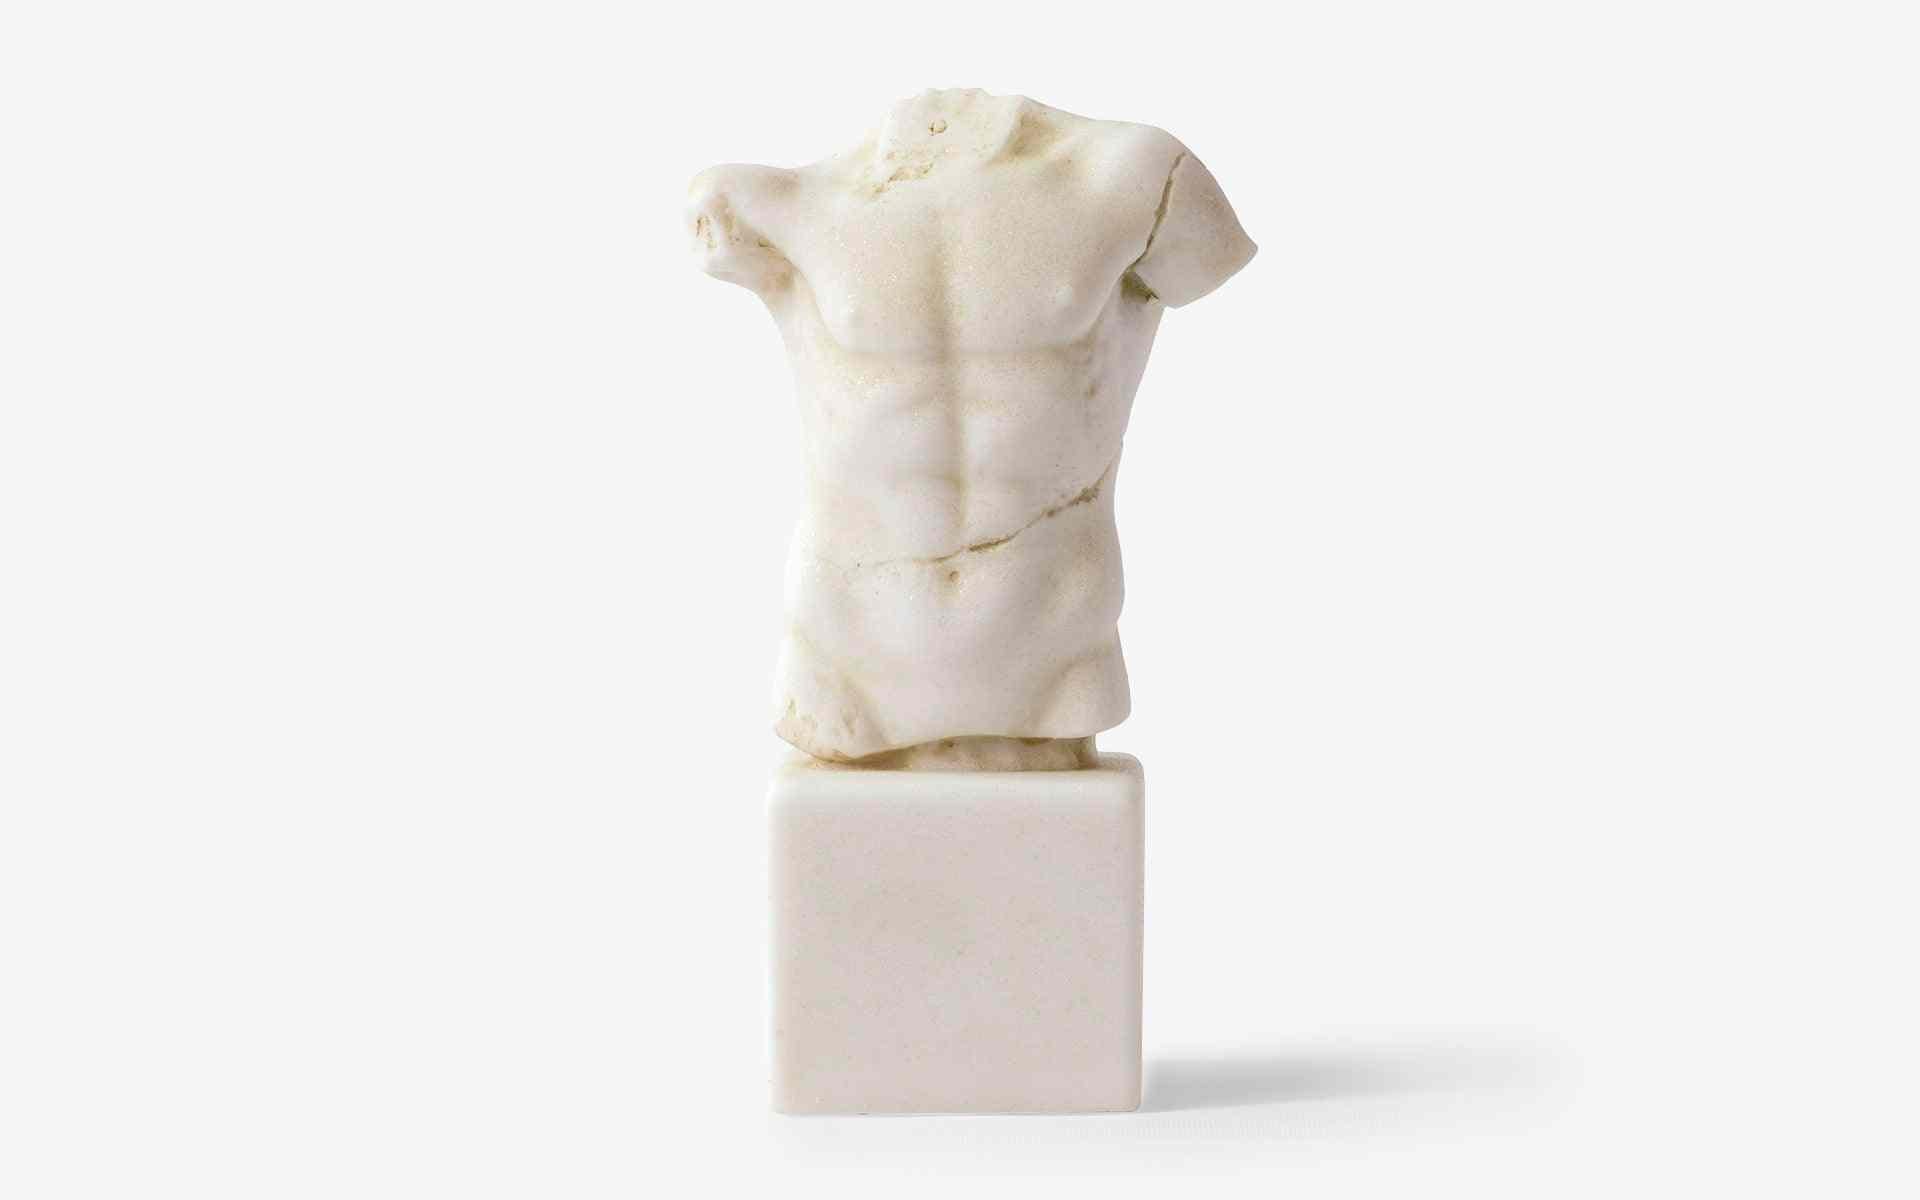 Height: 5.9'' / Weight: 800 gr (for each item)

The set concerns 1 female, 1 male torso. This is a work that symbolizes the depiction of the ideal male and female form.

-Produced from pressed marble powder.
-Produced from the original molds of the